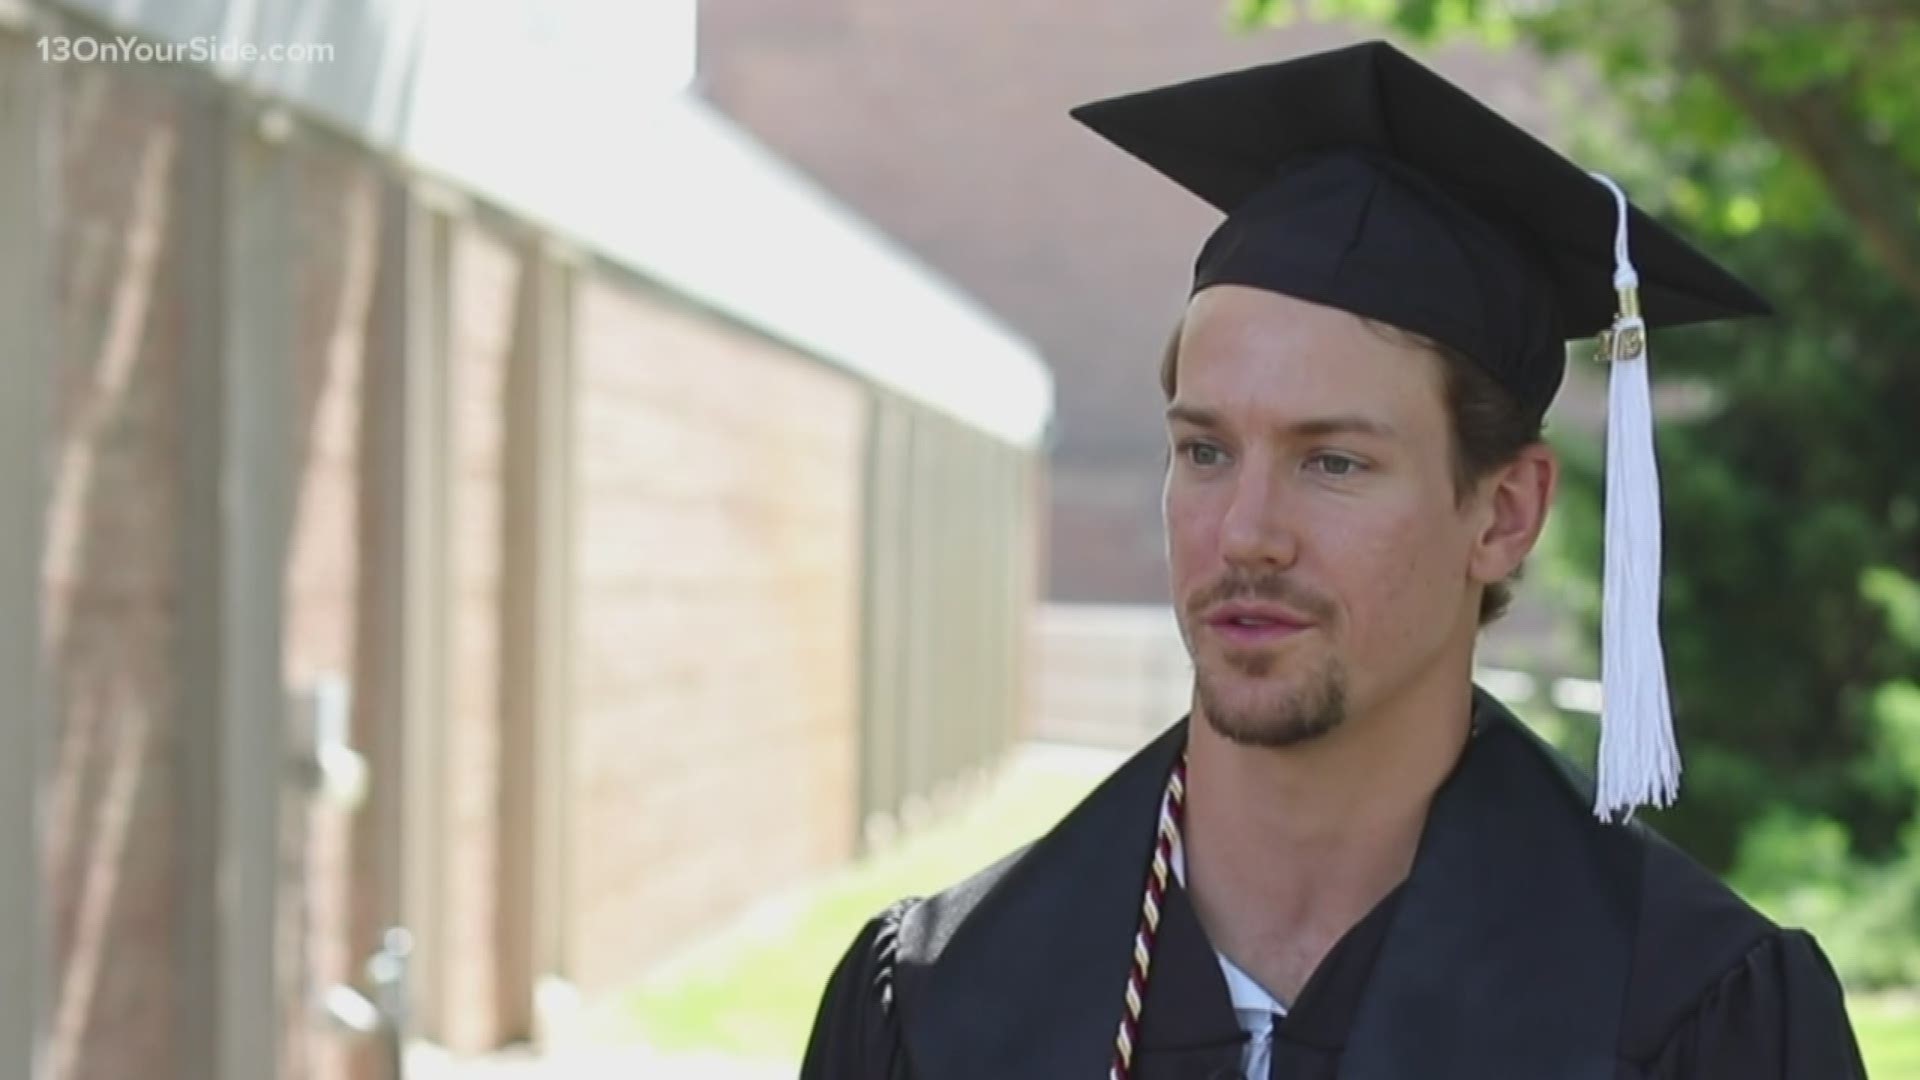 Red Wings player receives undergrad degree from WMU